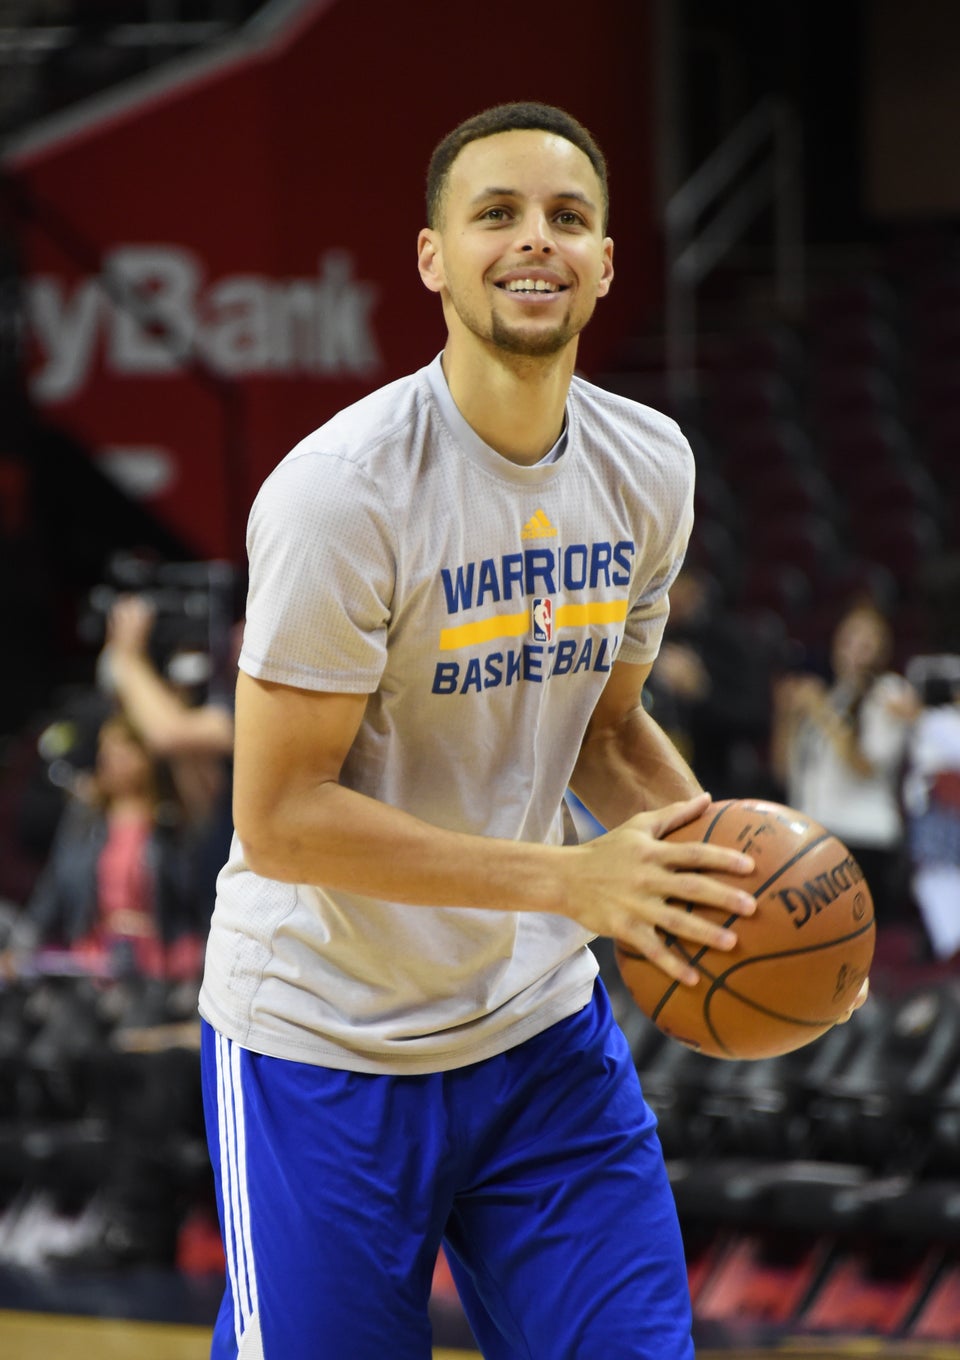 People Had A Lot Of Jokes About Steph Curry’s New Shoes